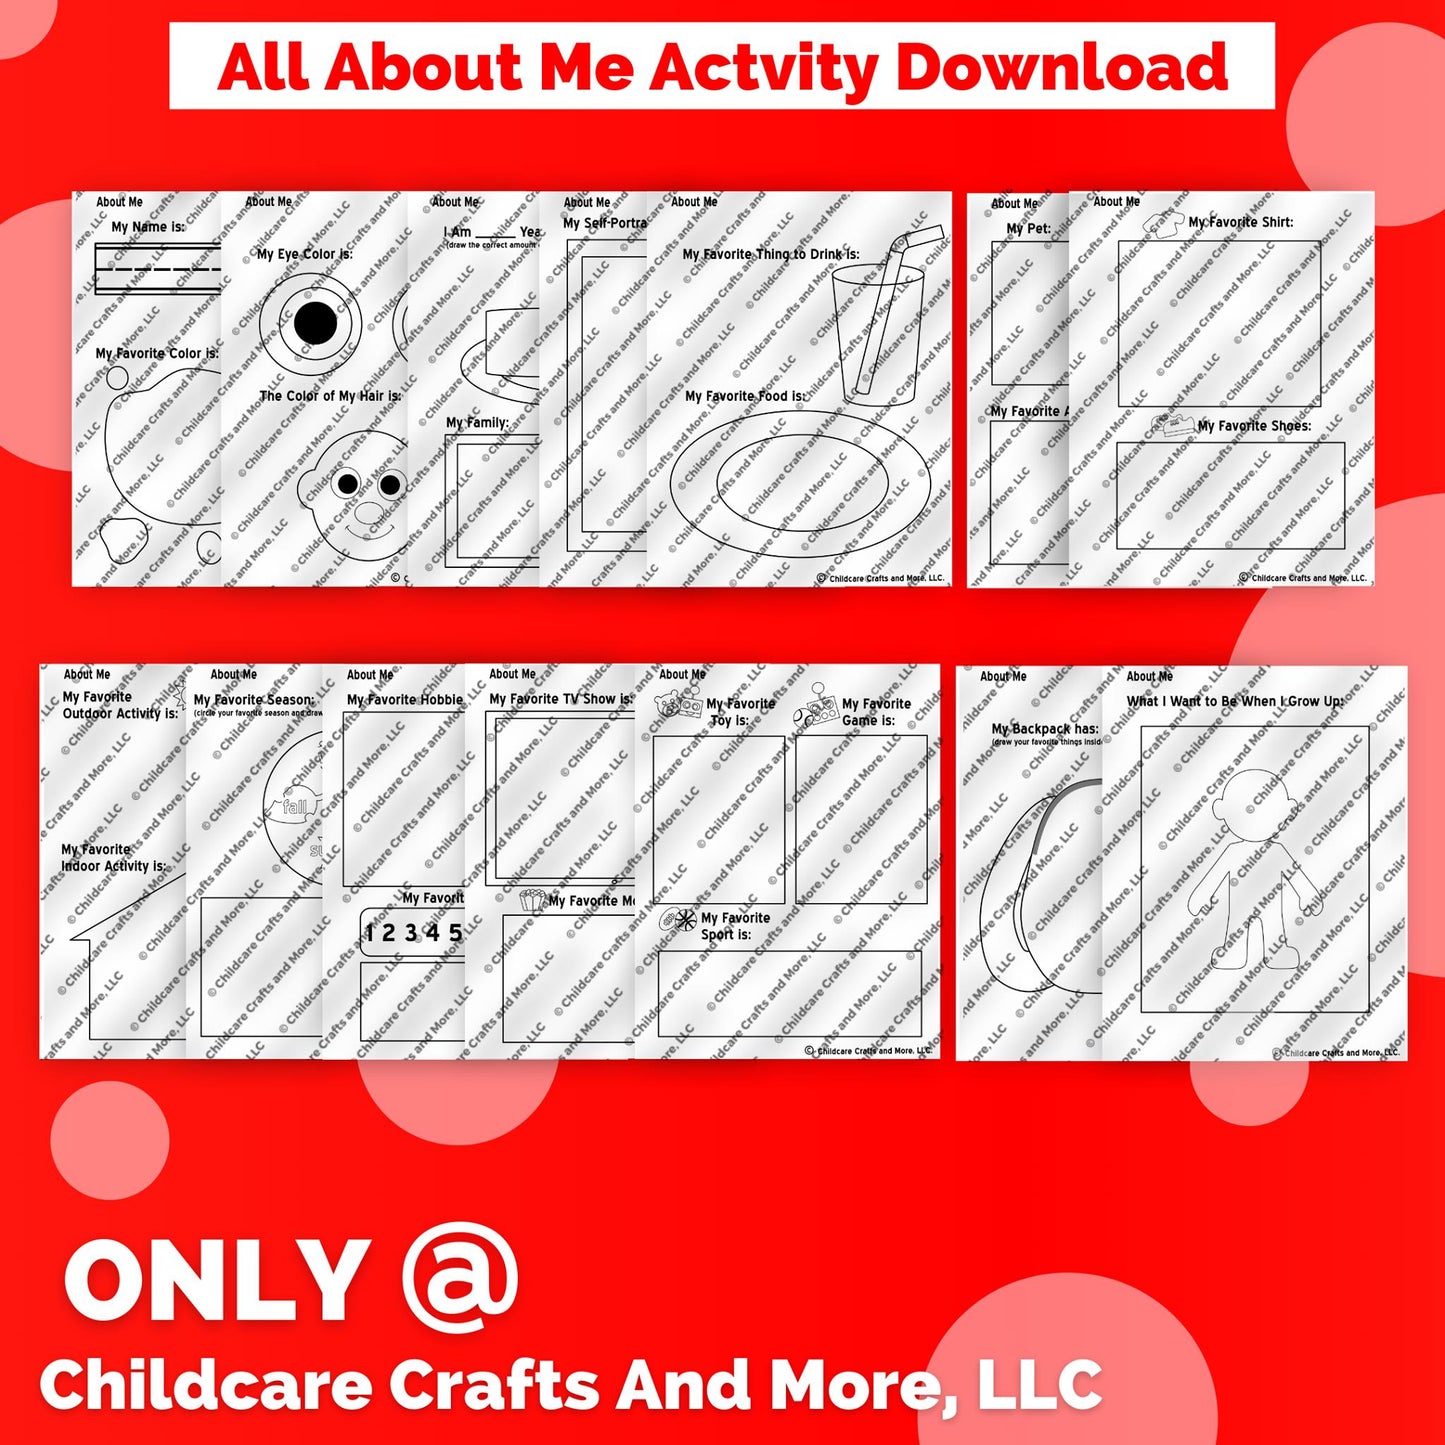 All About Me Activities Binder Download